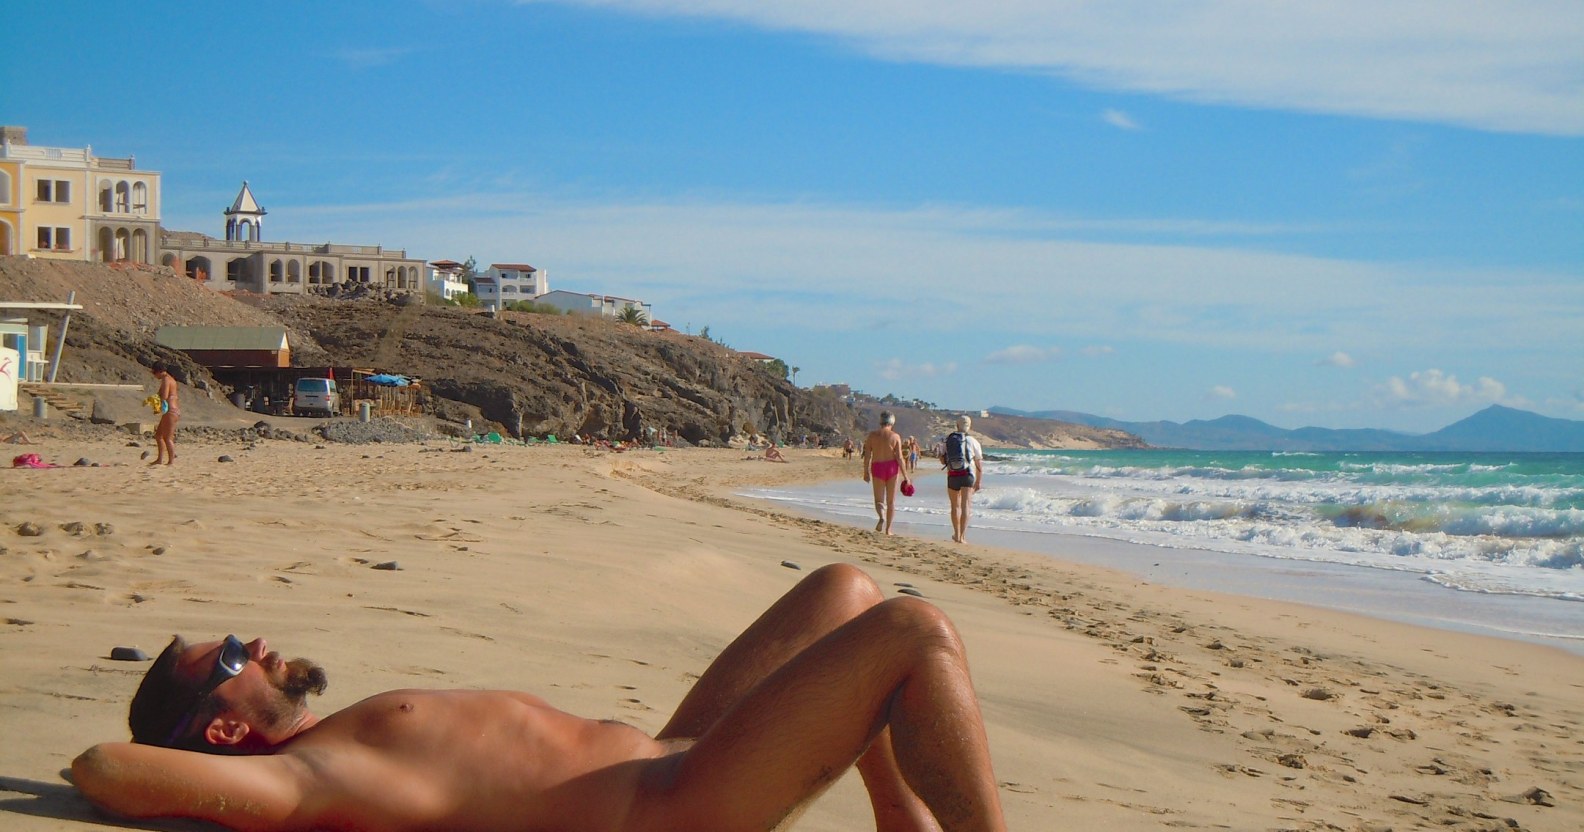 Beach House Party Naked - 10 best gay nude beaches in Europe | PinkNews